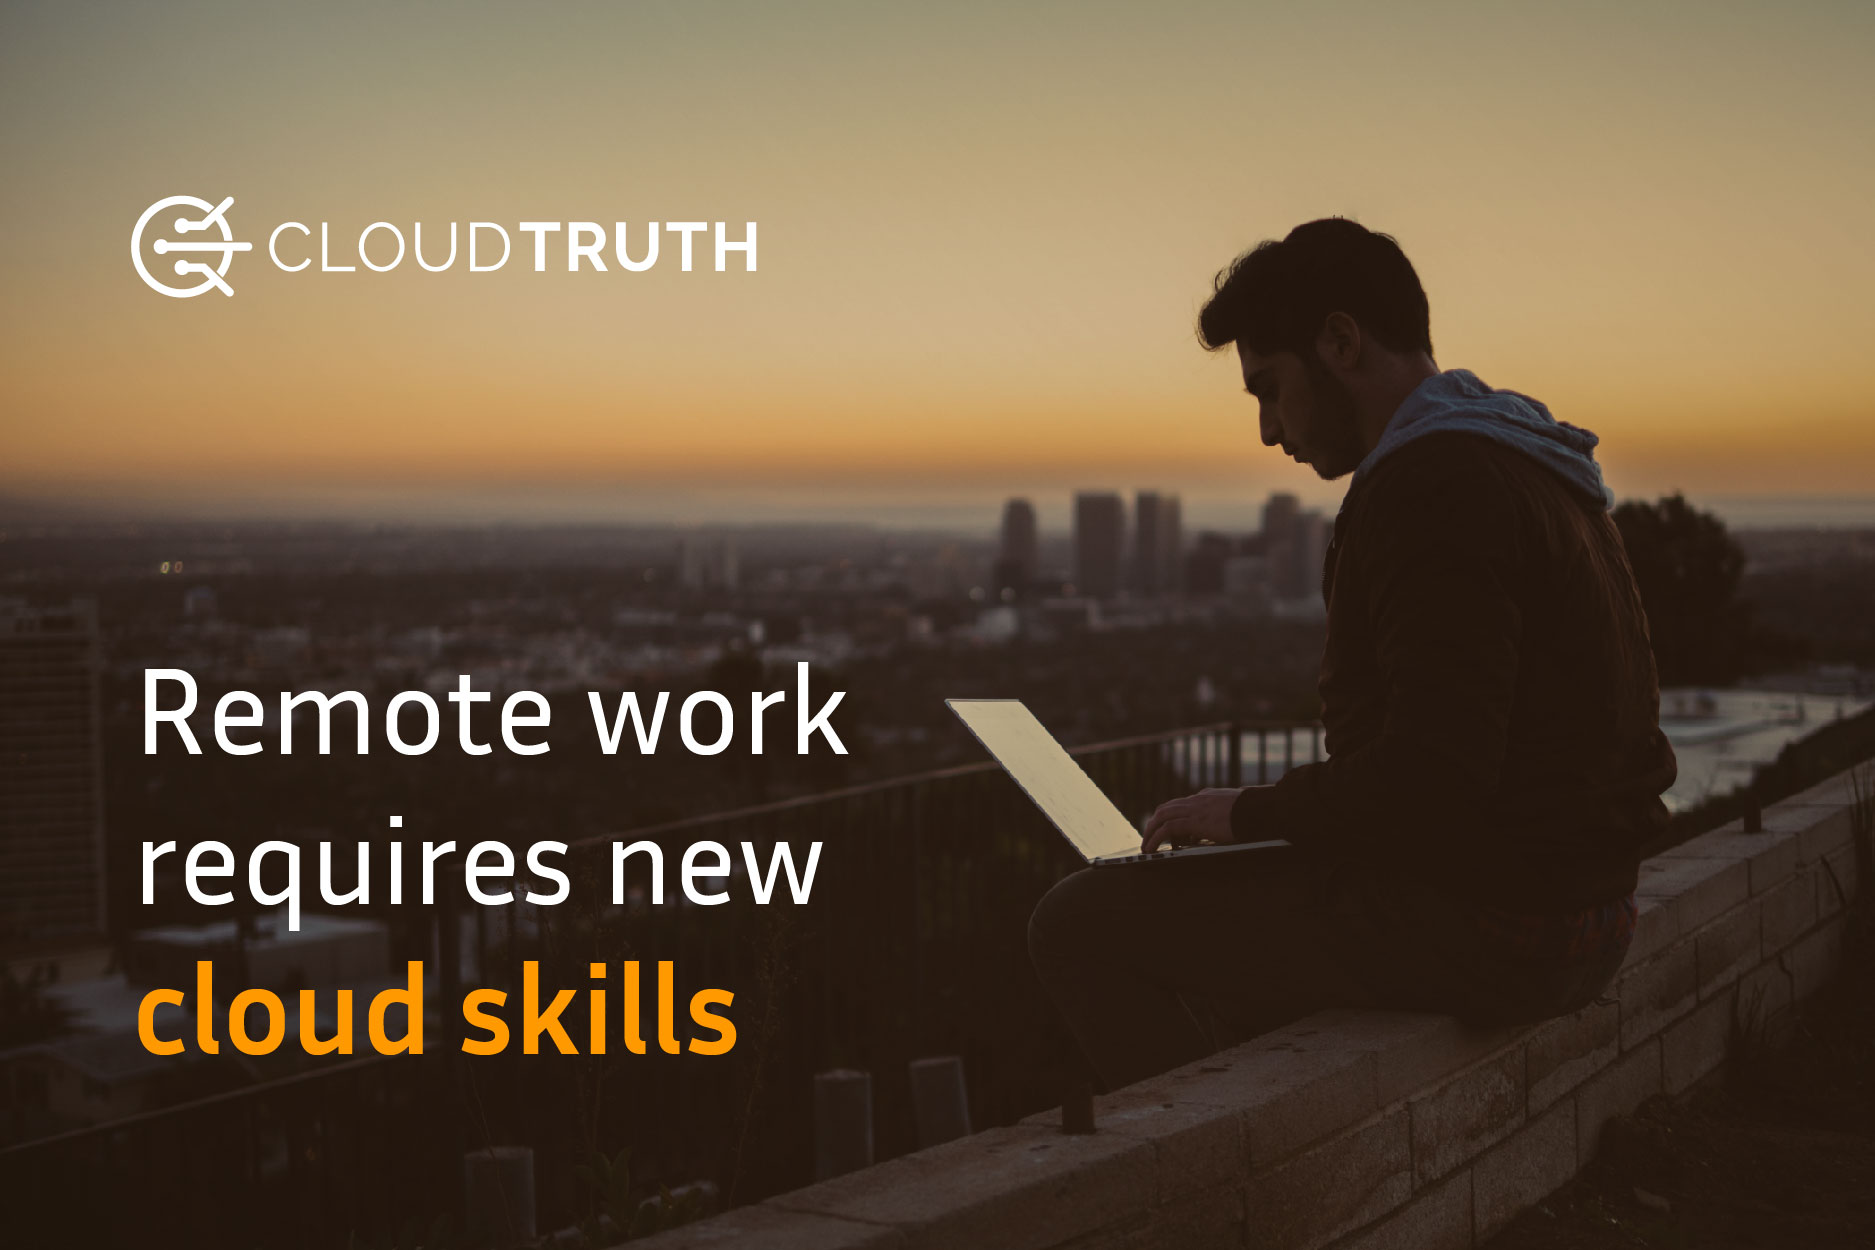 As Companies Shift to Remote Work, Cloud Management Is More Important than Ever